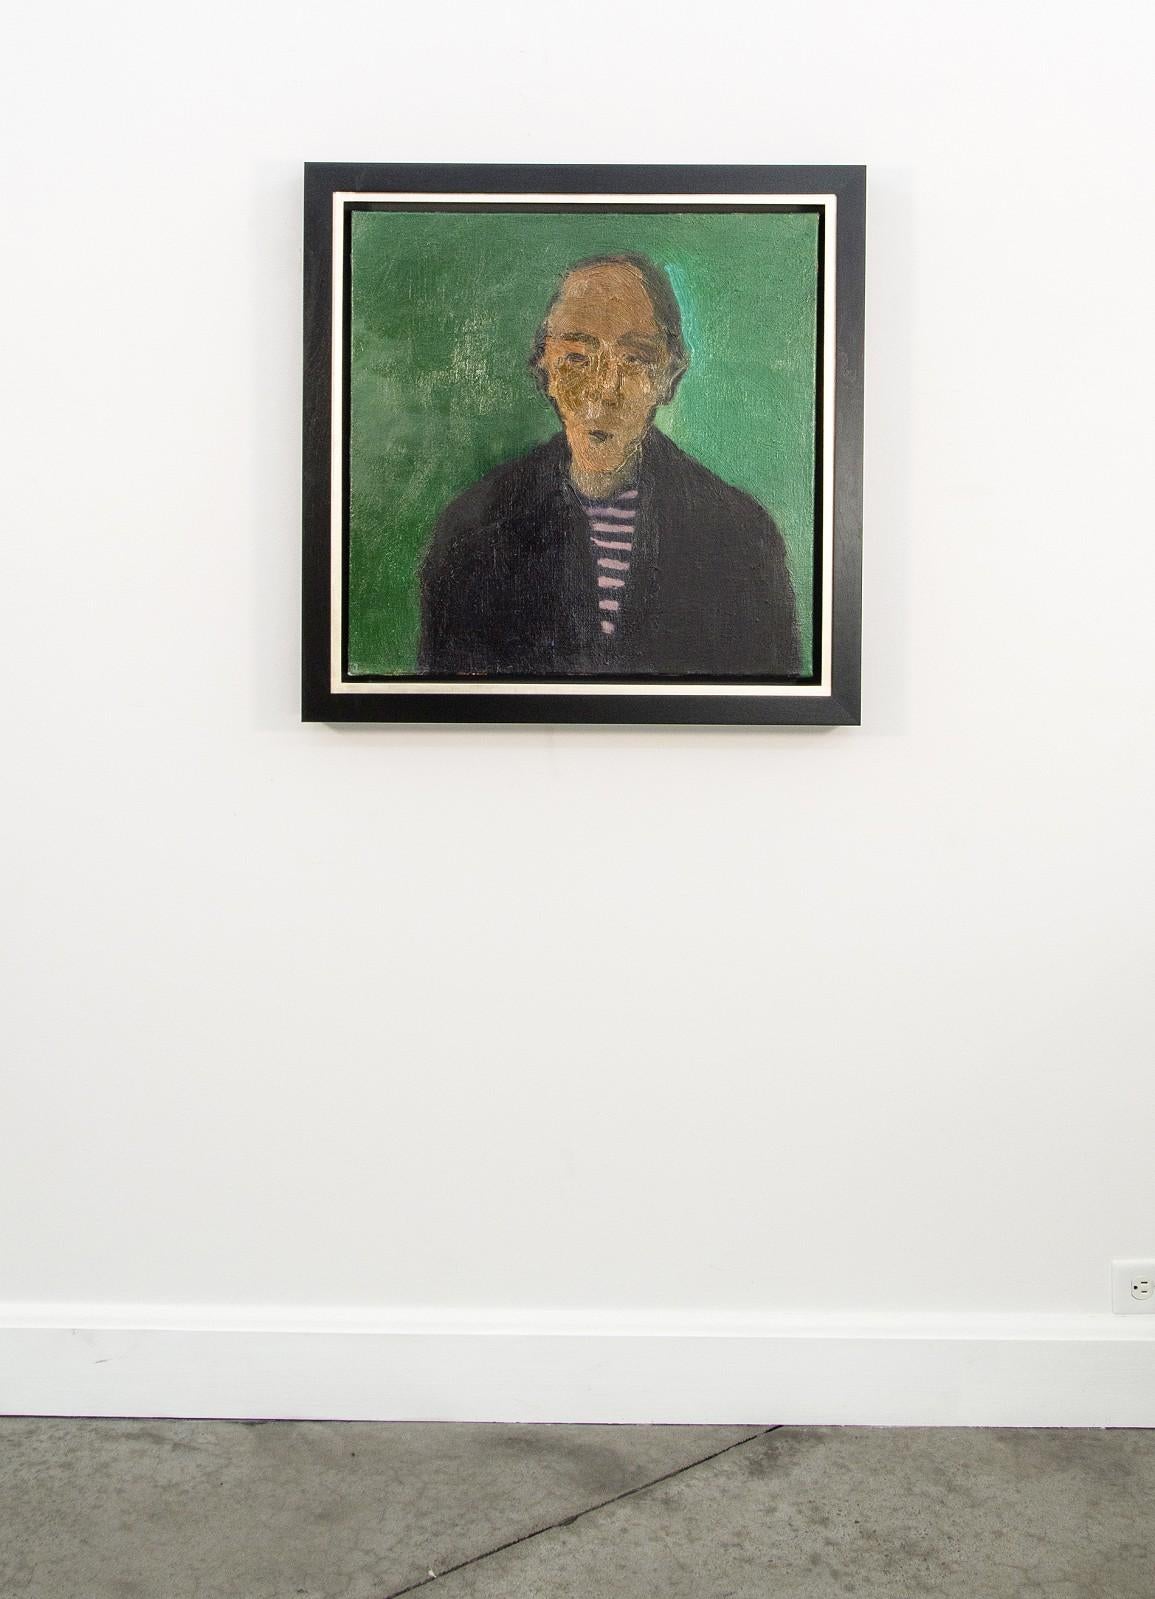 Man with Striped Shirt - green, male portrait figurative still life oil painting For Sale 2